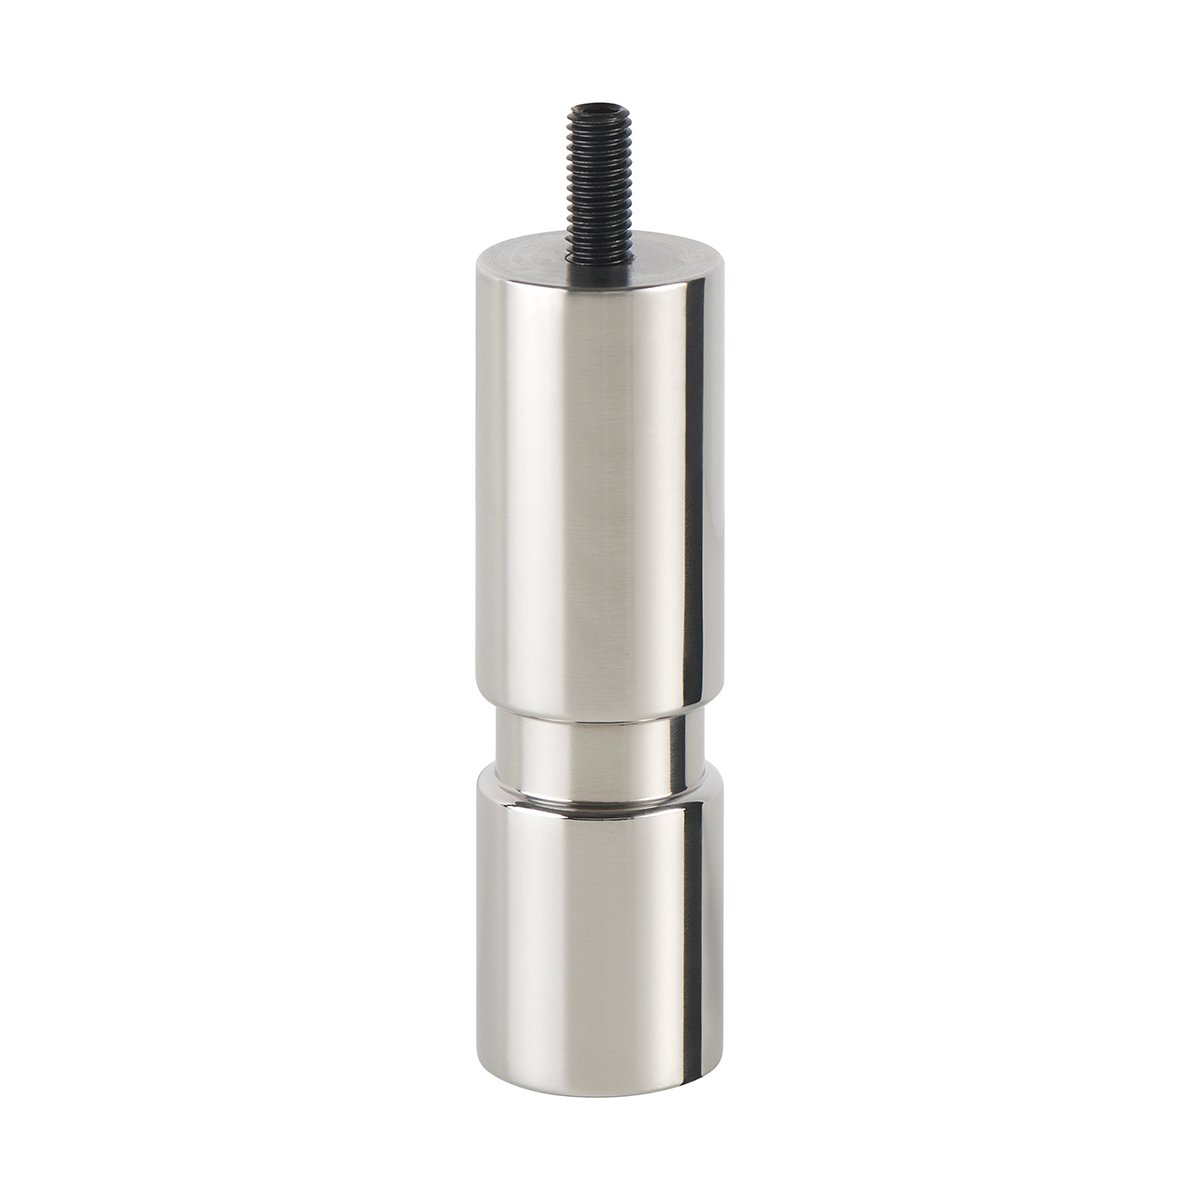 Thelma cylindrical furniture leg 100 mm Polished stainless steel